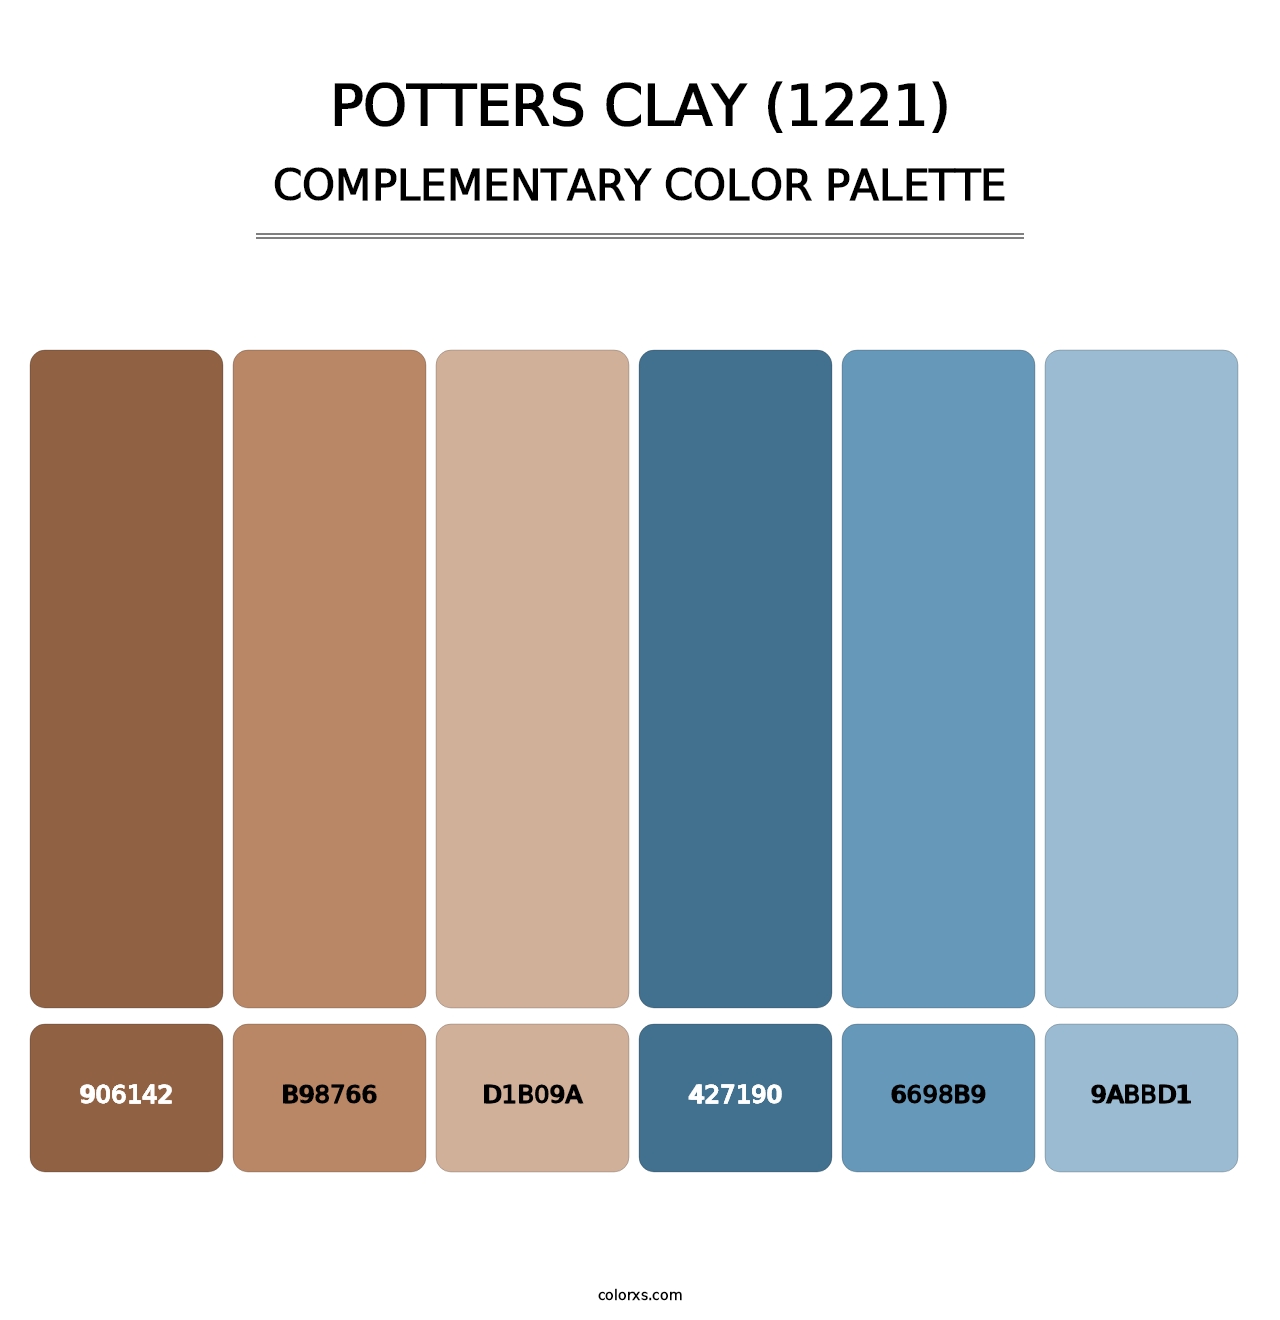 Potters Clay (1221) - Complementary Color Palette